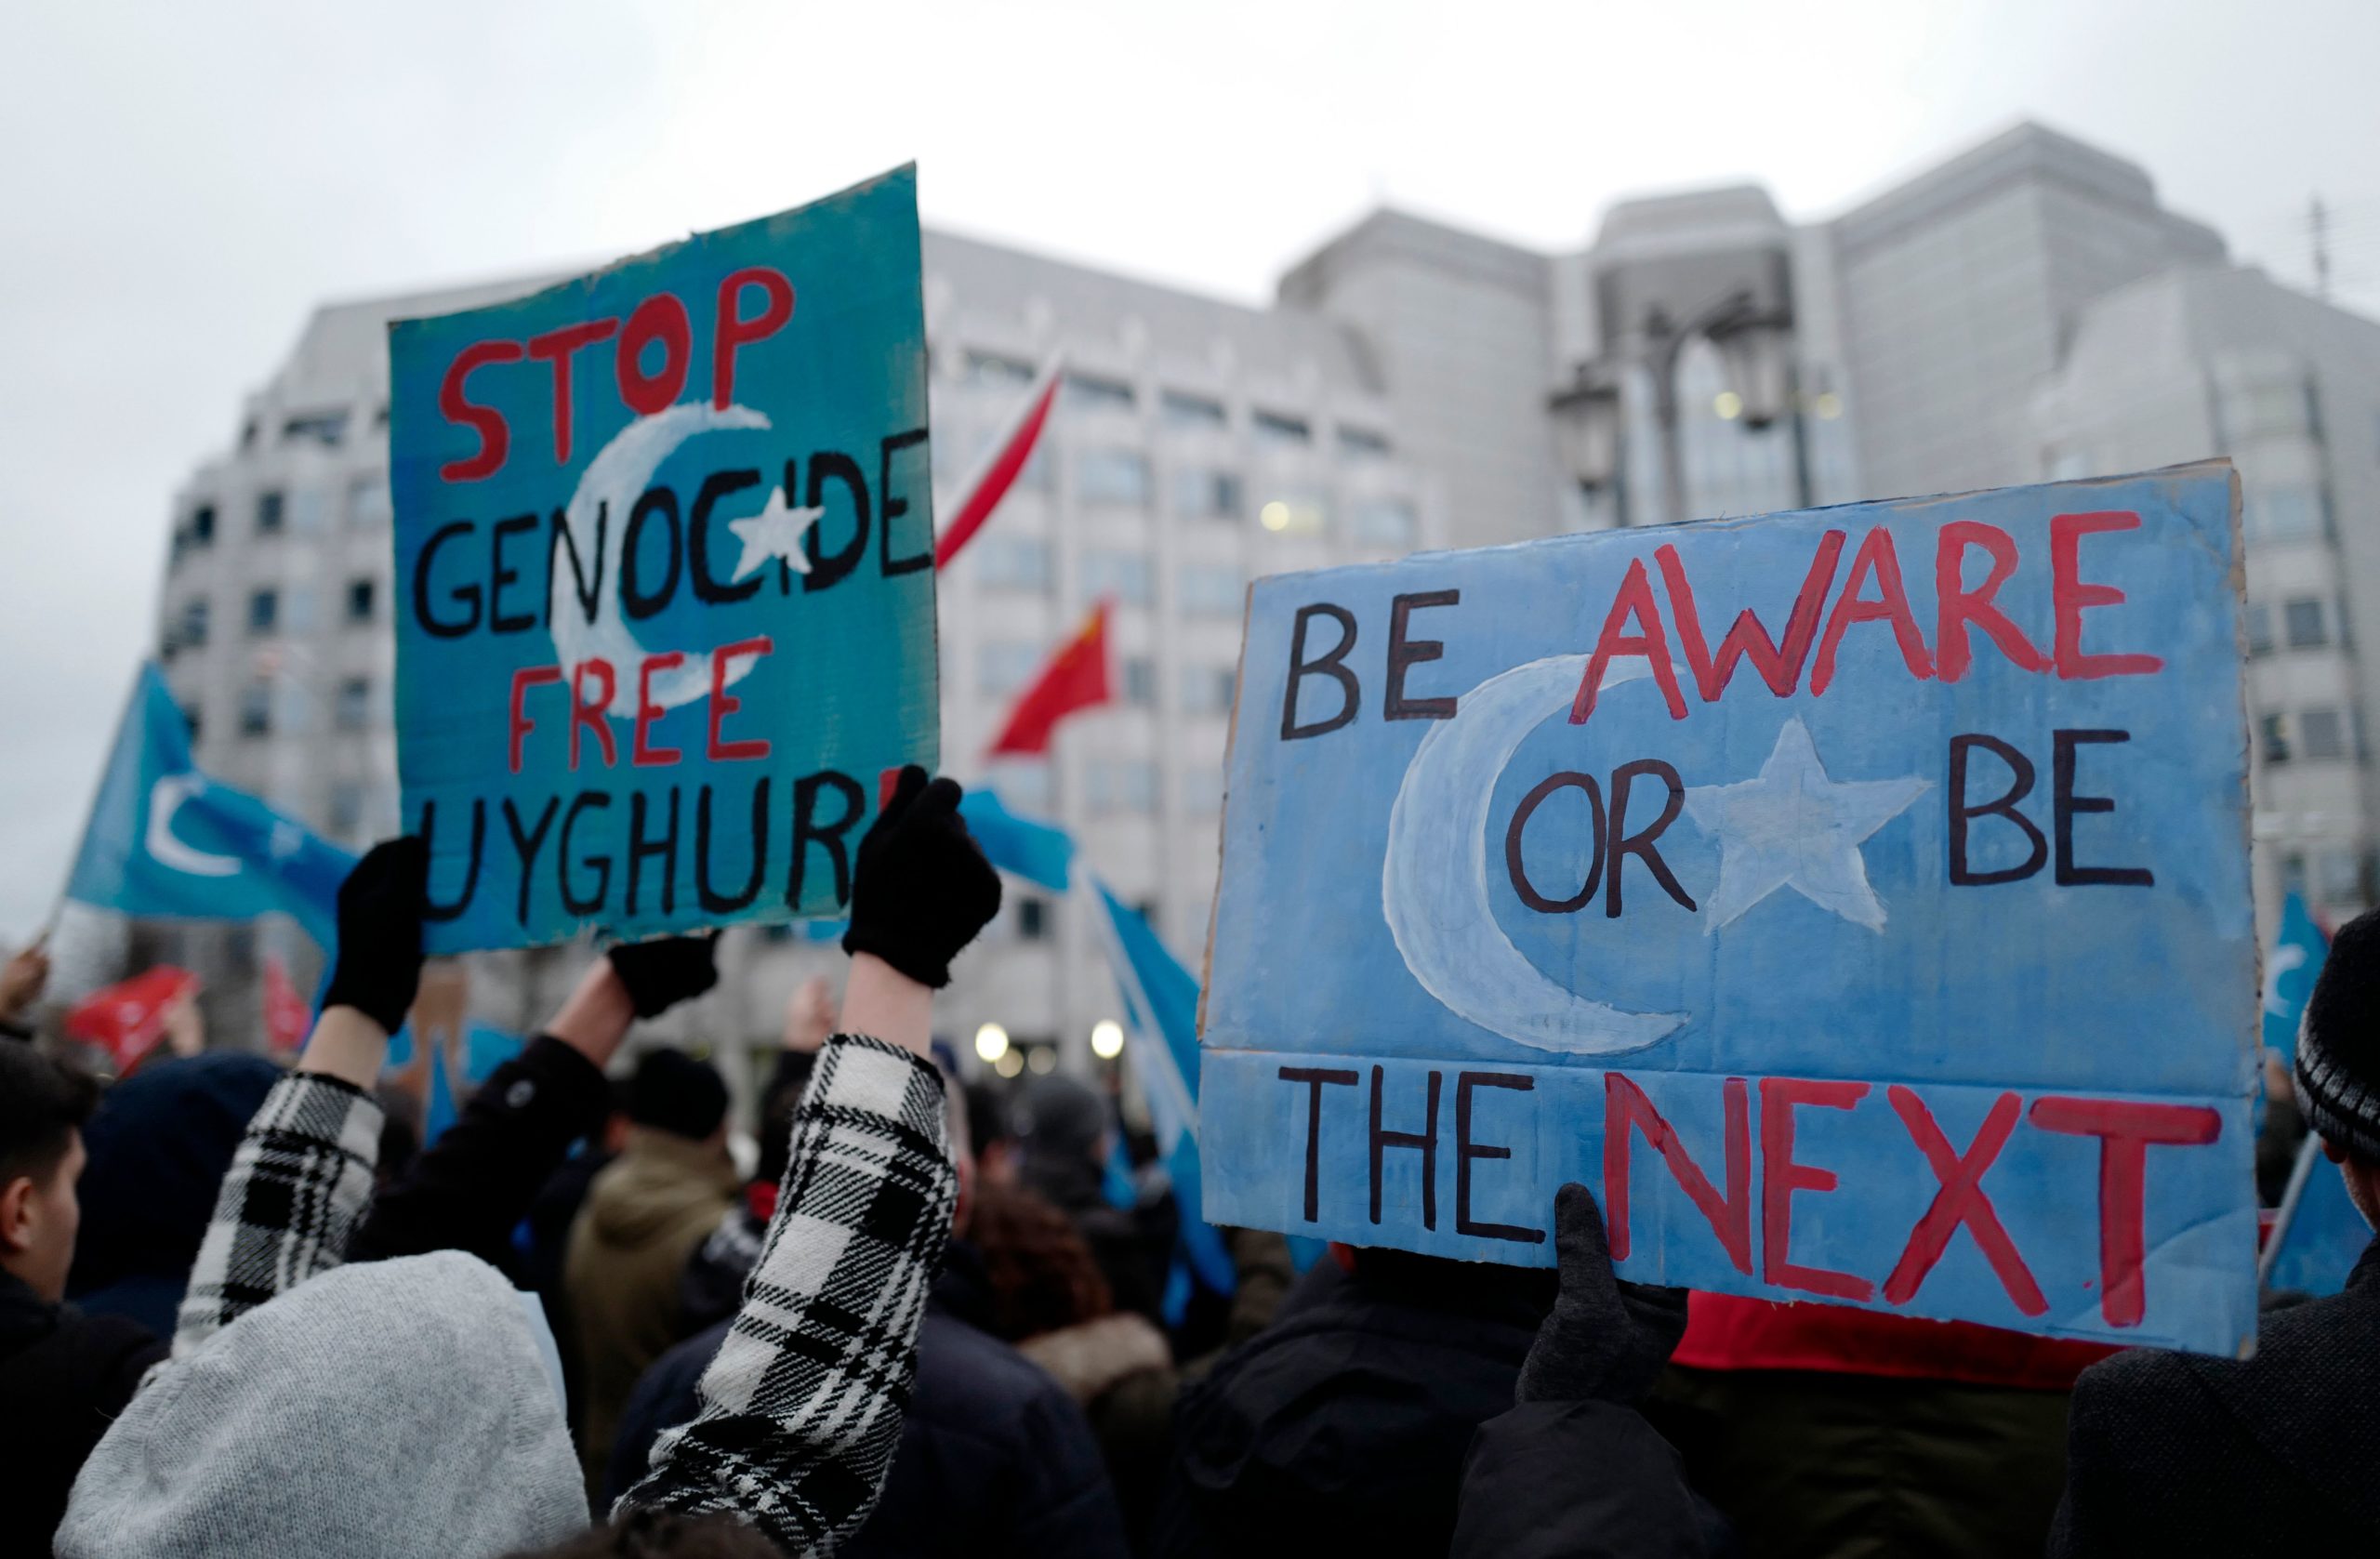 TOPSHOT - Demonstrators take part in a protest outside the Chinese embassy in Berlin on December 27, 2019, to call attention to Chinas mistreatment of members of the Uyghur community in western China. (Photo by John MACDOUGALL / AFP) (Photo by JOHN MACDOUGALL/AFP via Getty Images)